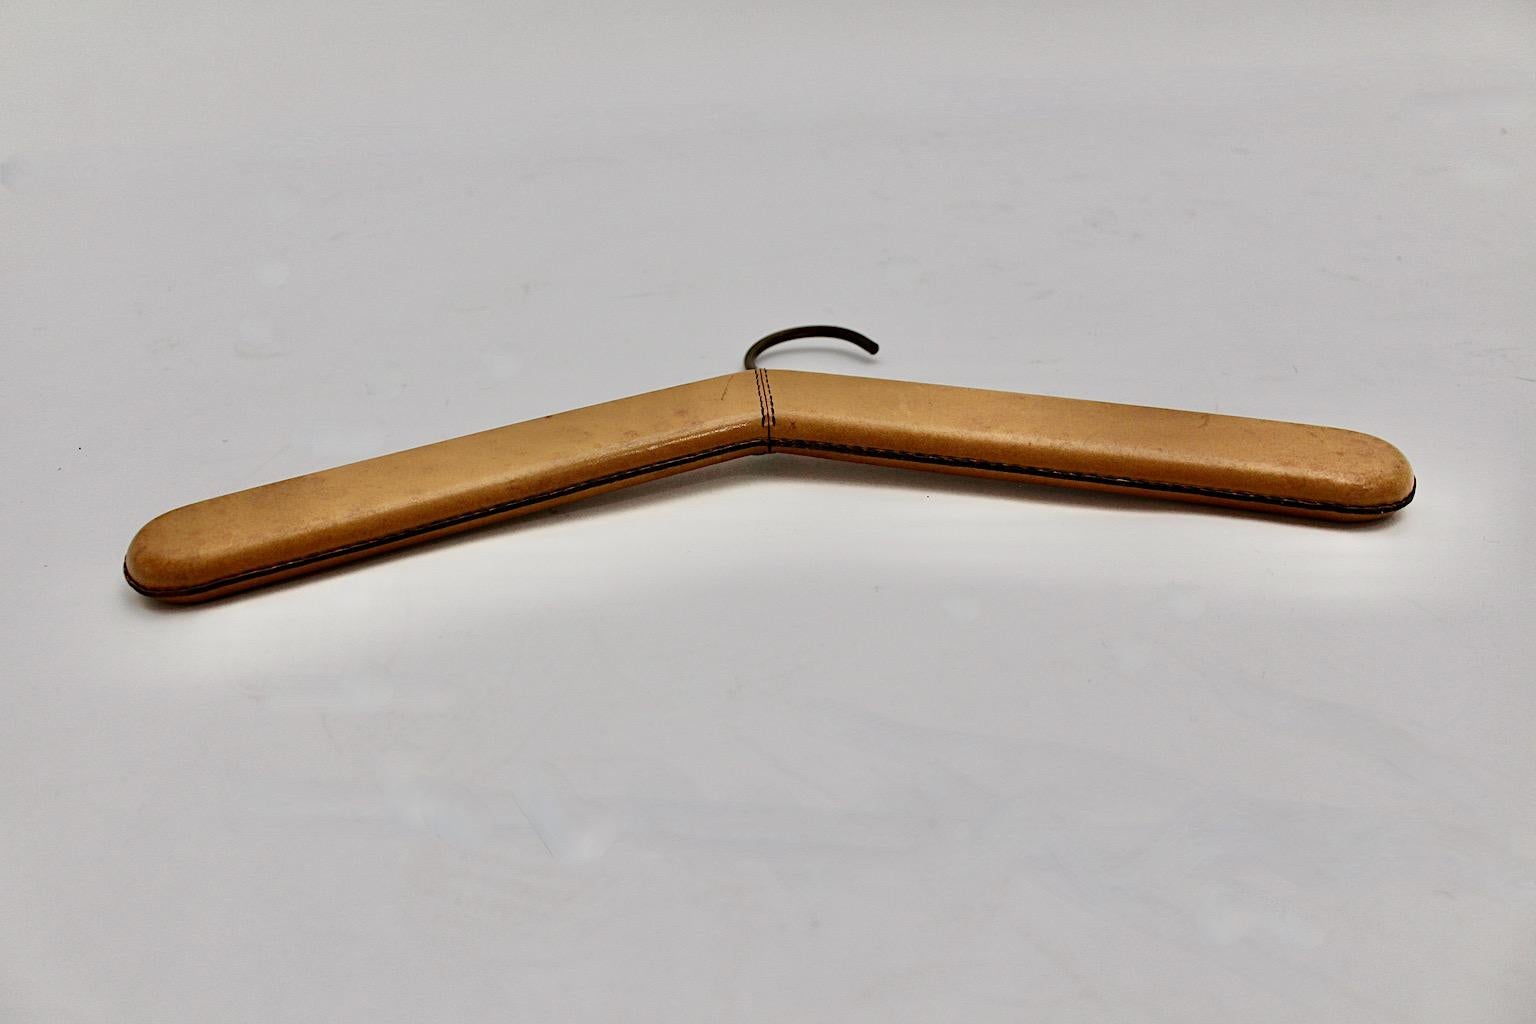 Mid-Century Modern vintage coat hook model# 4650 designed by Carl Auböck and manufactured
by Carl Auböck workshop 1960 Vienna.
The gorgeous stitched leather coat hook with solid brass hook shows high quality. The warm caramel brown tone features